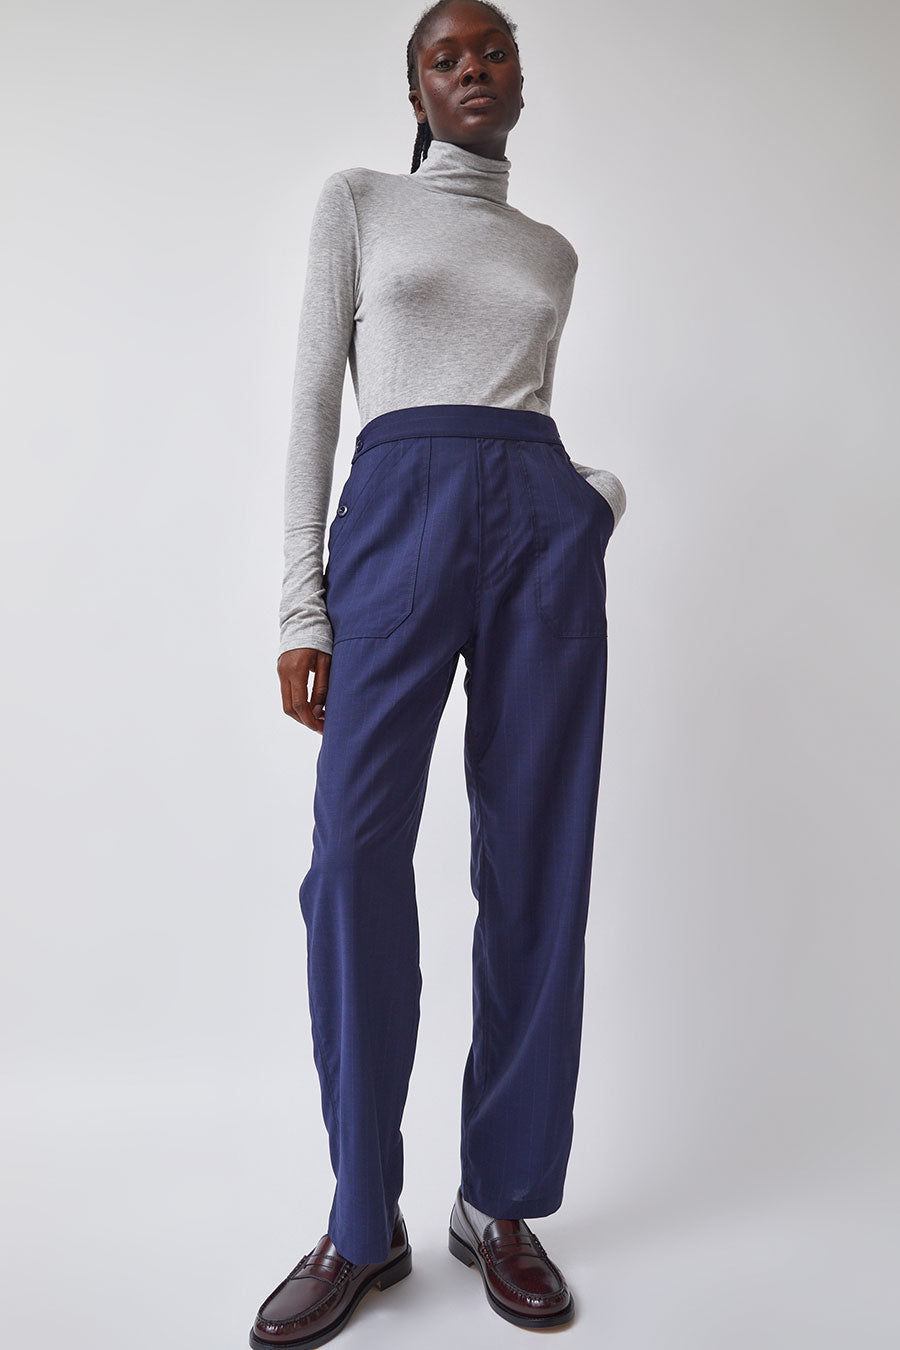 Heather Harlan Work Pant in Navy and White Pinstripe